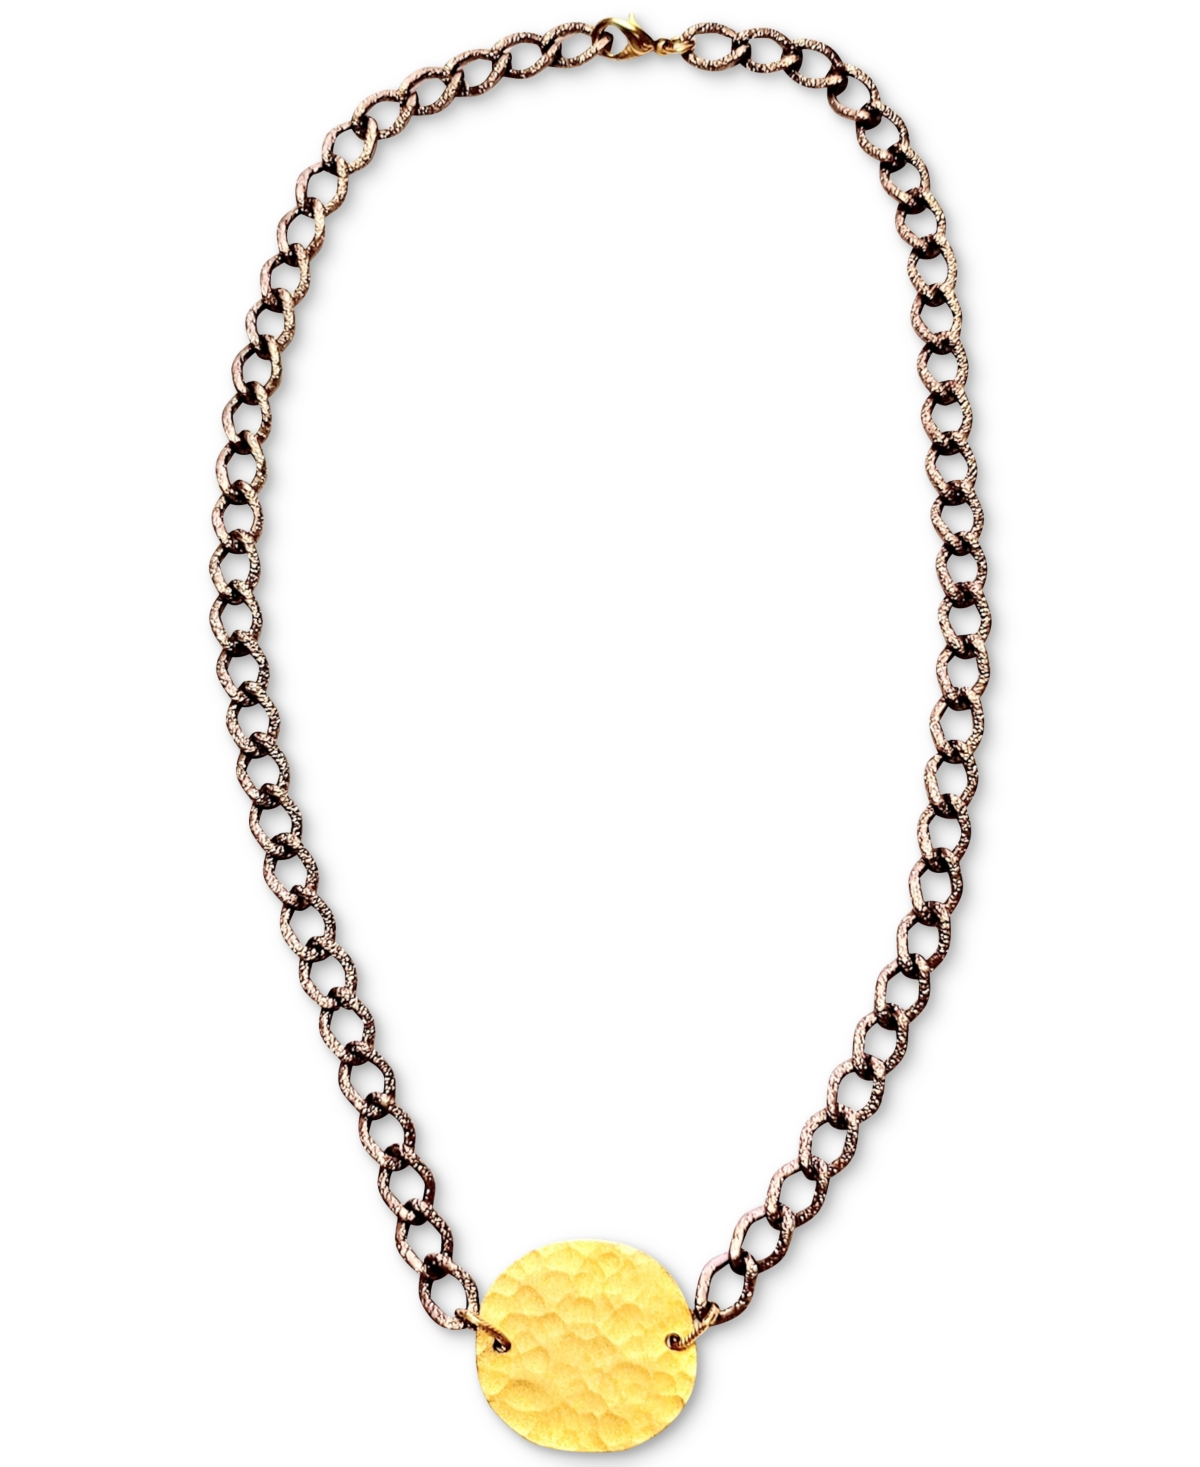 Two-Tone Hammered Disc Pendant Necklace, 16" + 1" extender - Gold